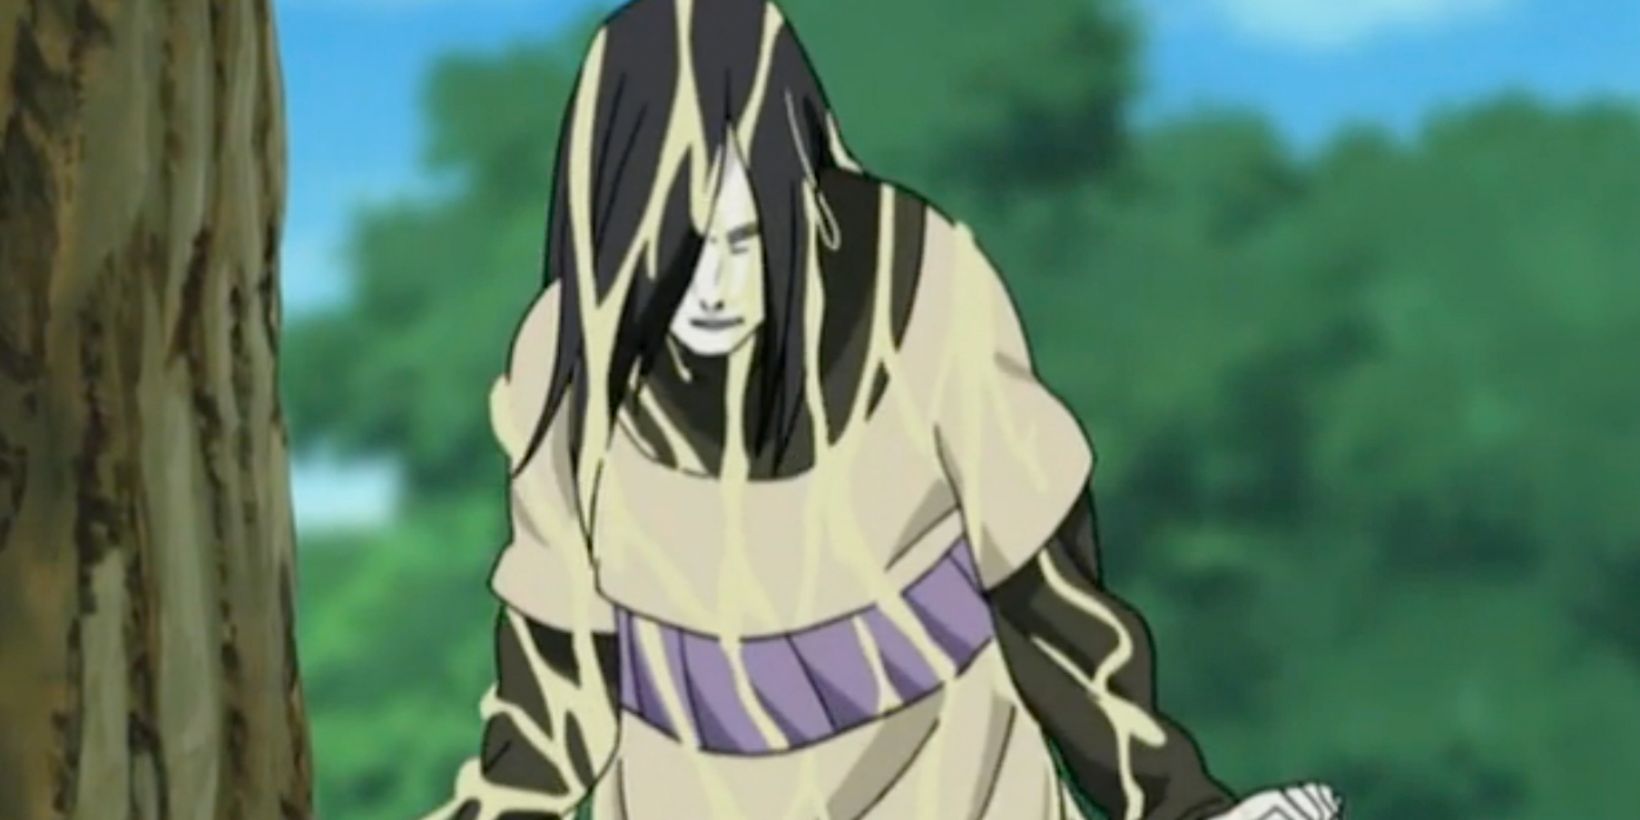 Orochimaru after shedding his skin using his own Body Replacement Technique in Naruto